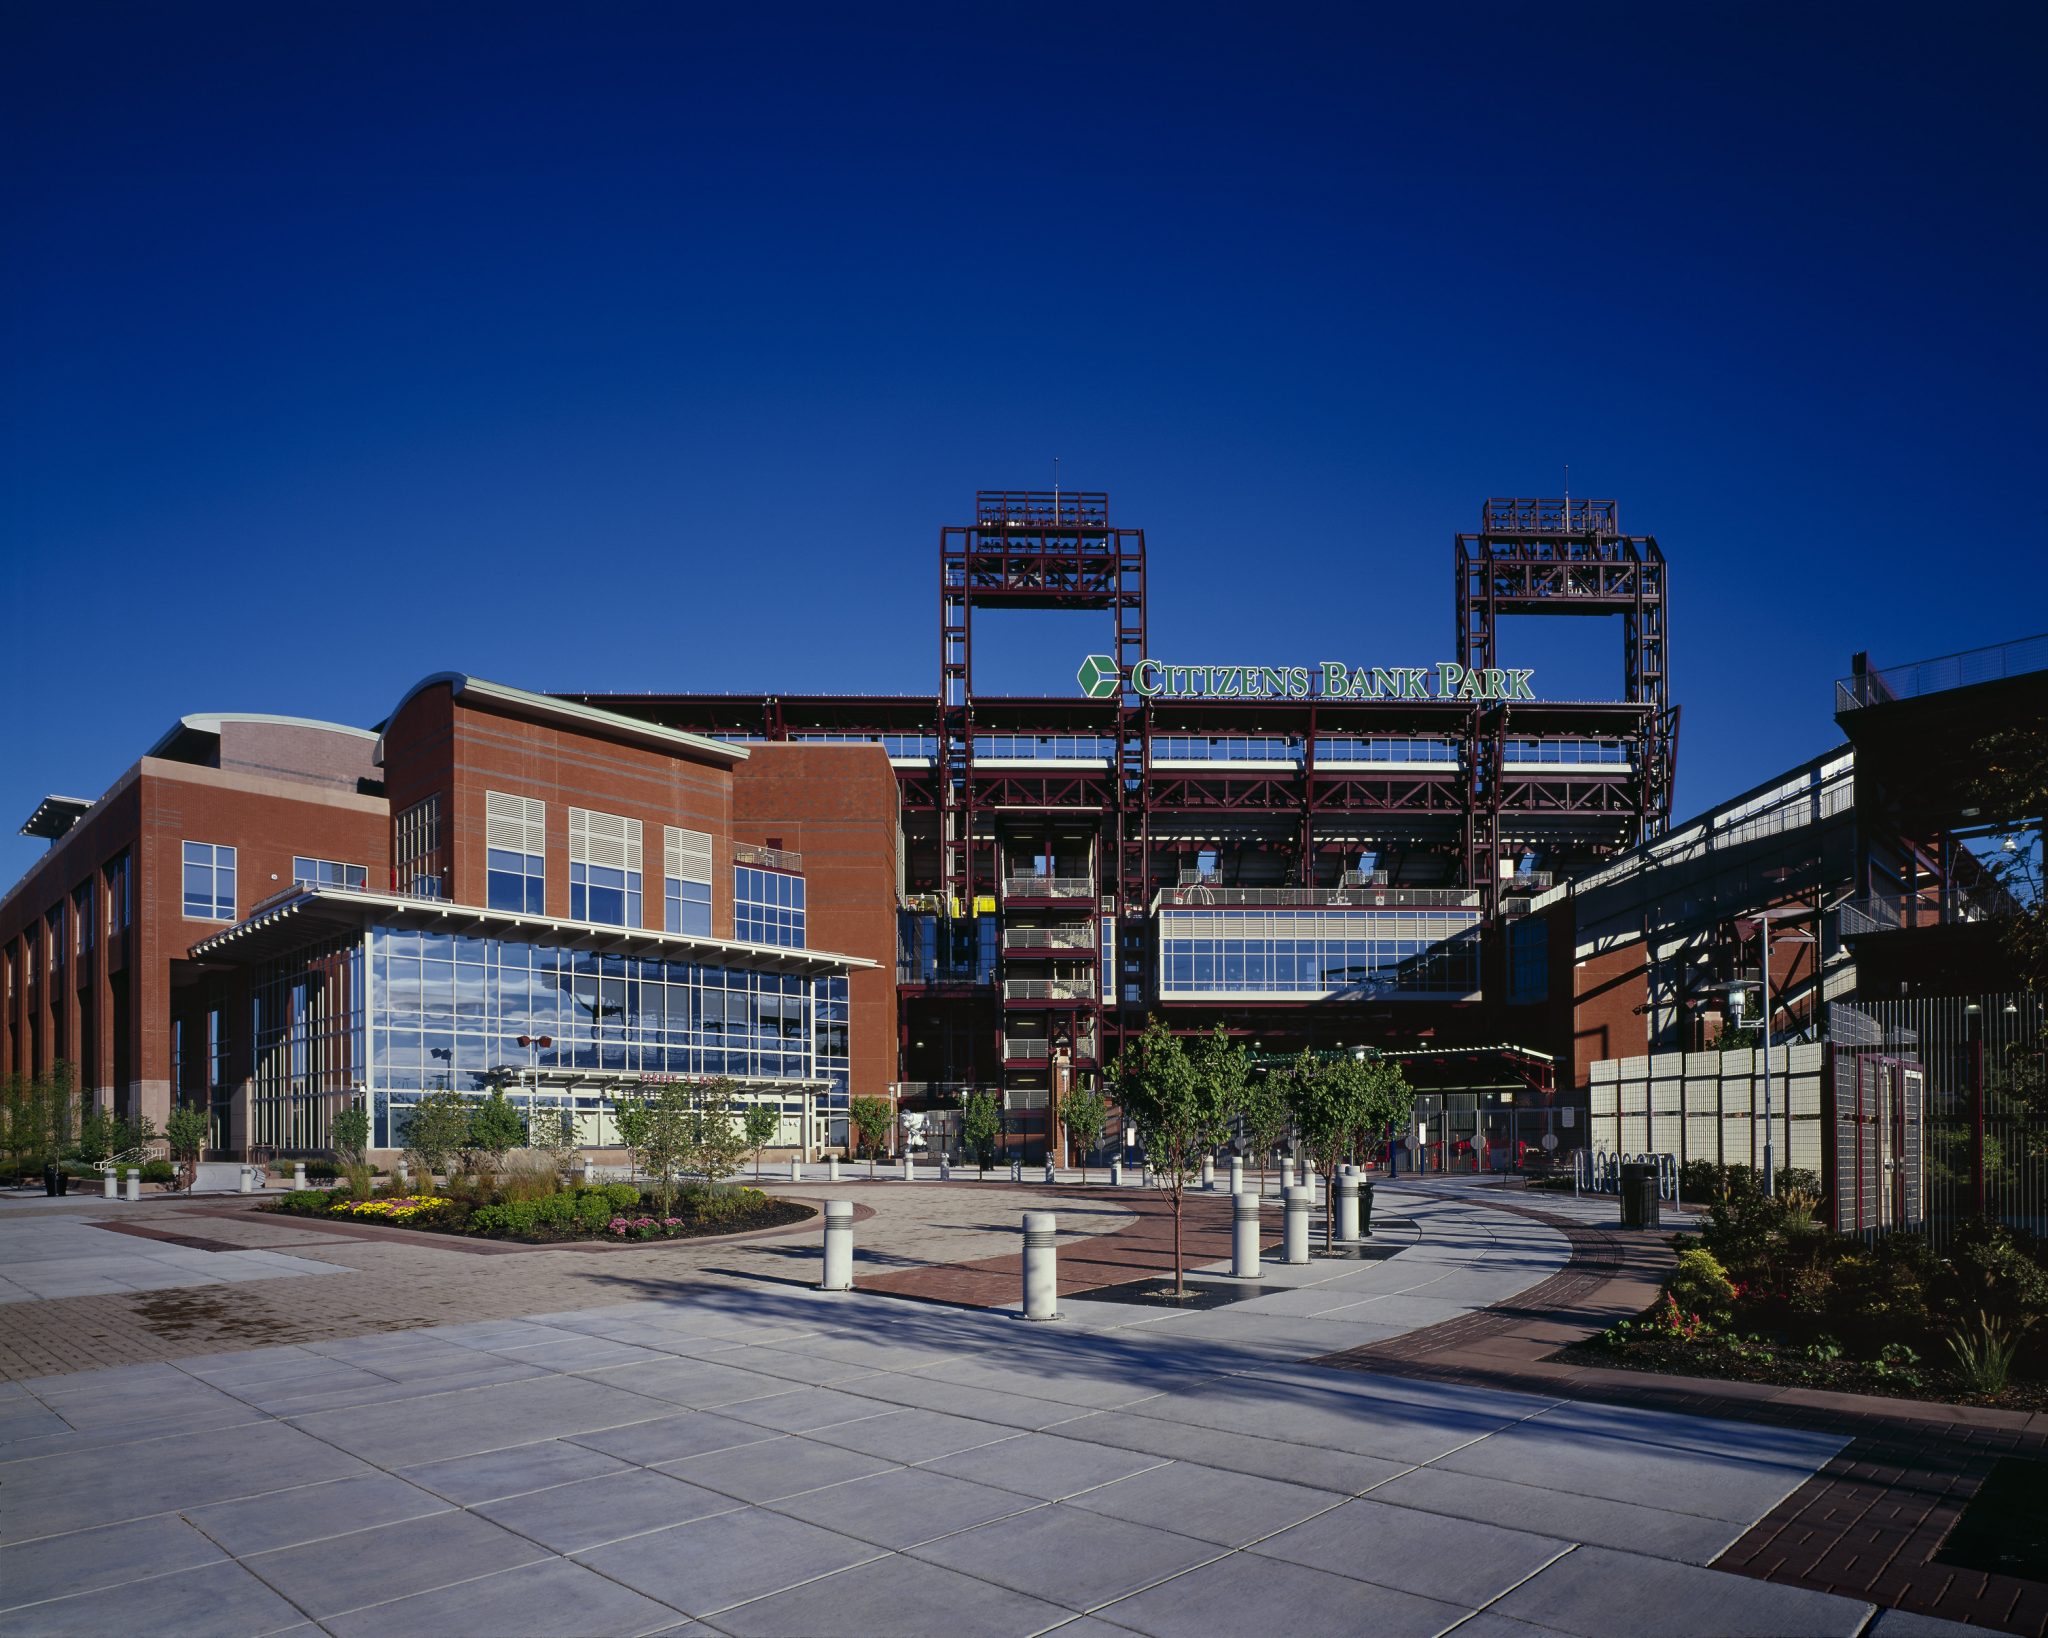 Citizens Bank Park: 10 Years Later